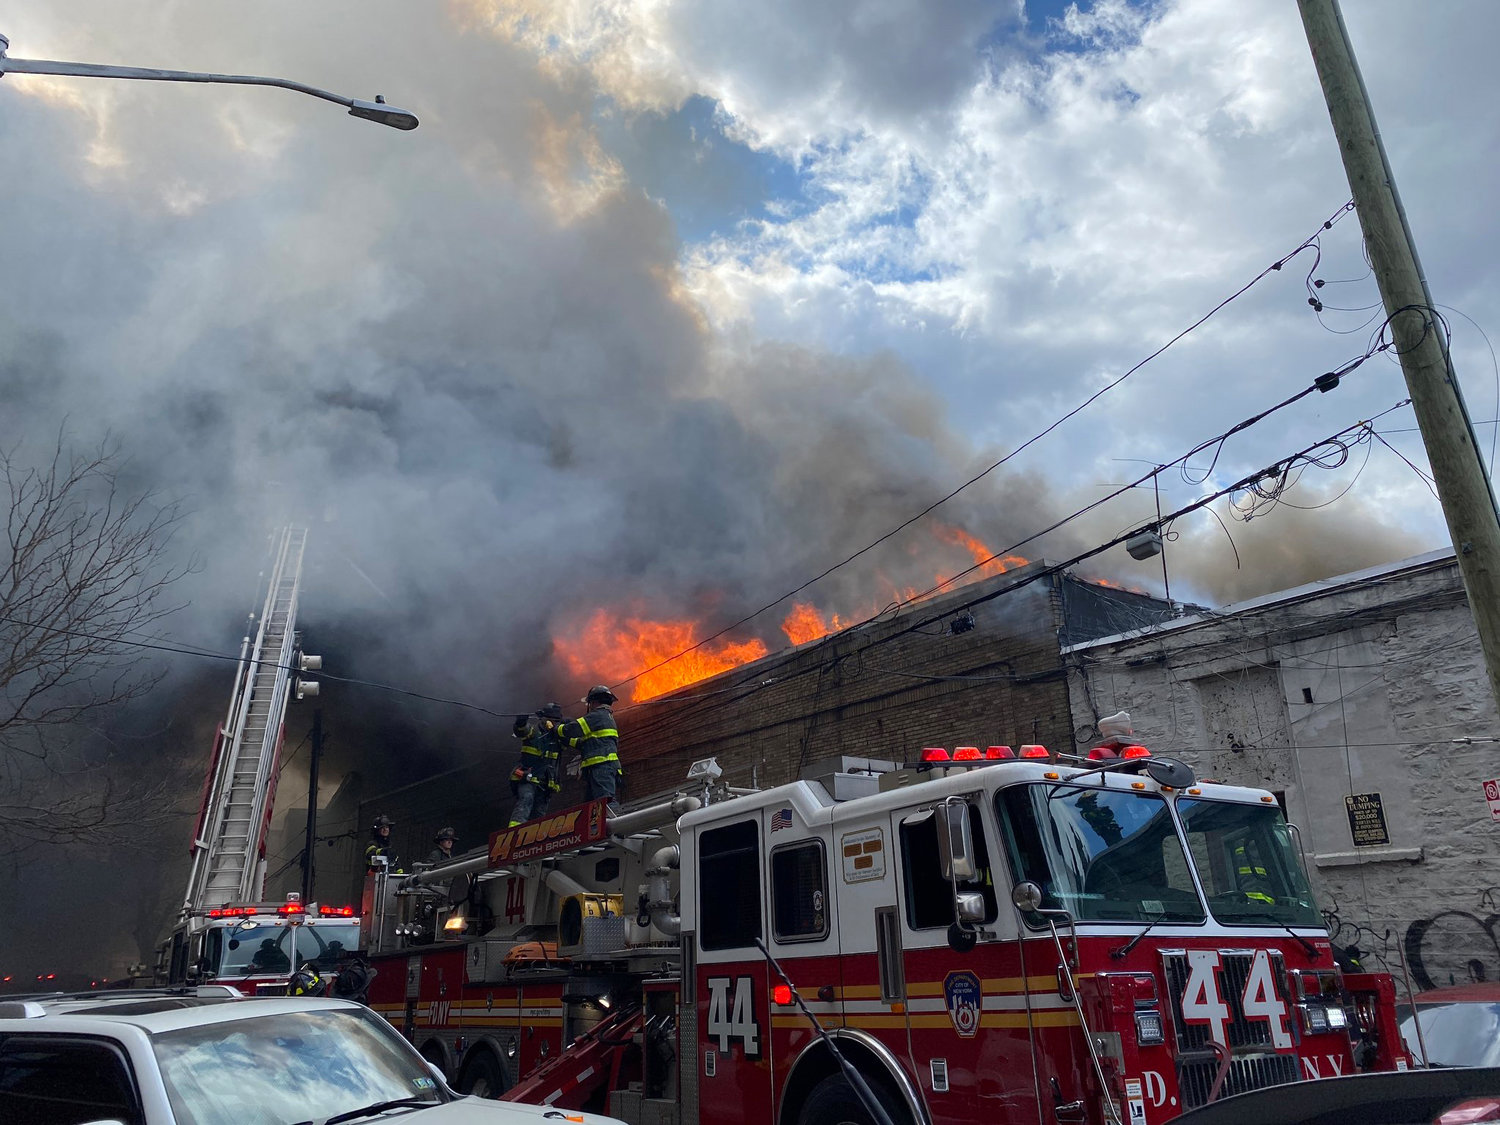 A five-alarm fire broke out on Sunday, March 5 at 2096 Grand Concourse between East 180th Street and East 181st Street. It left seven people with injuries ranging from minor to serious.